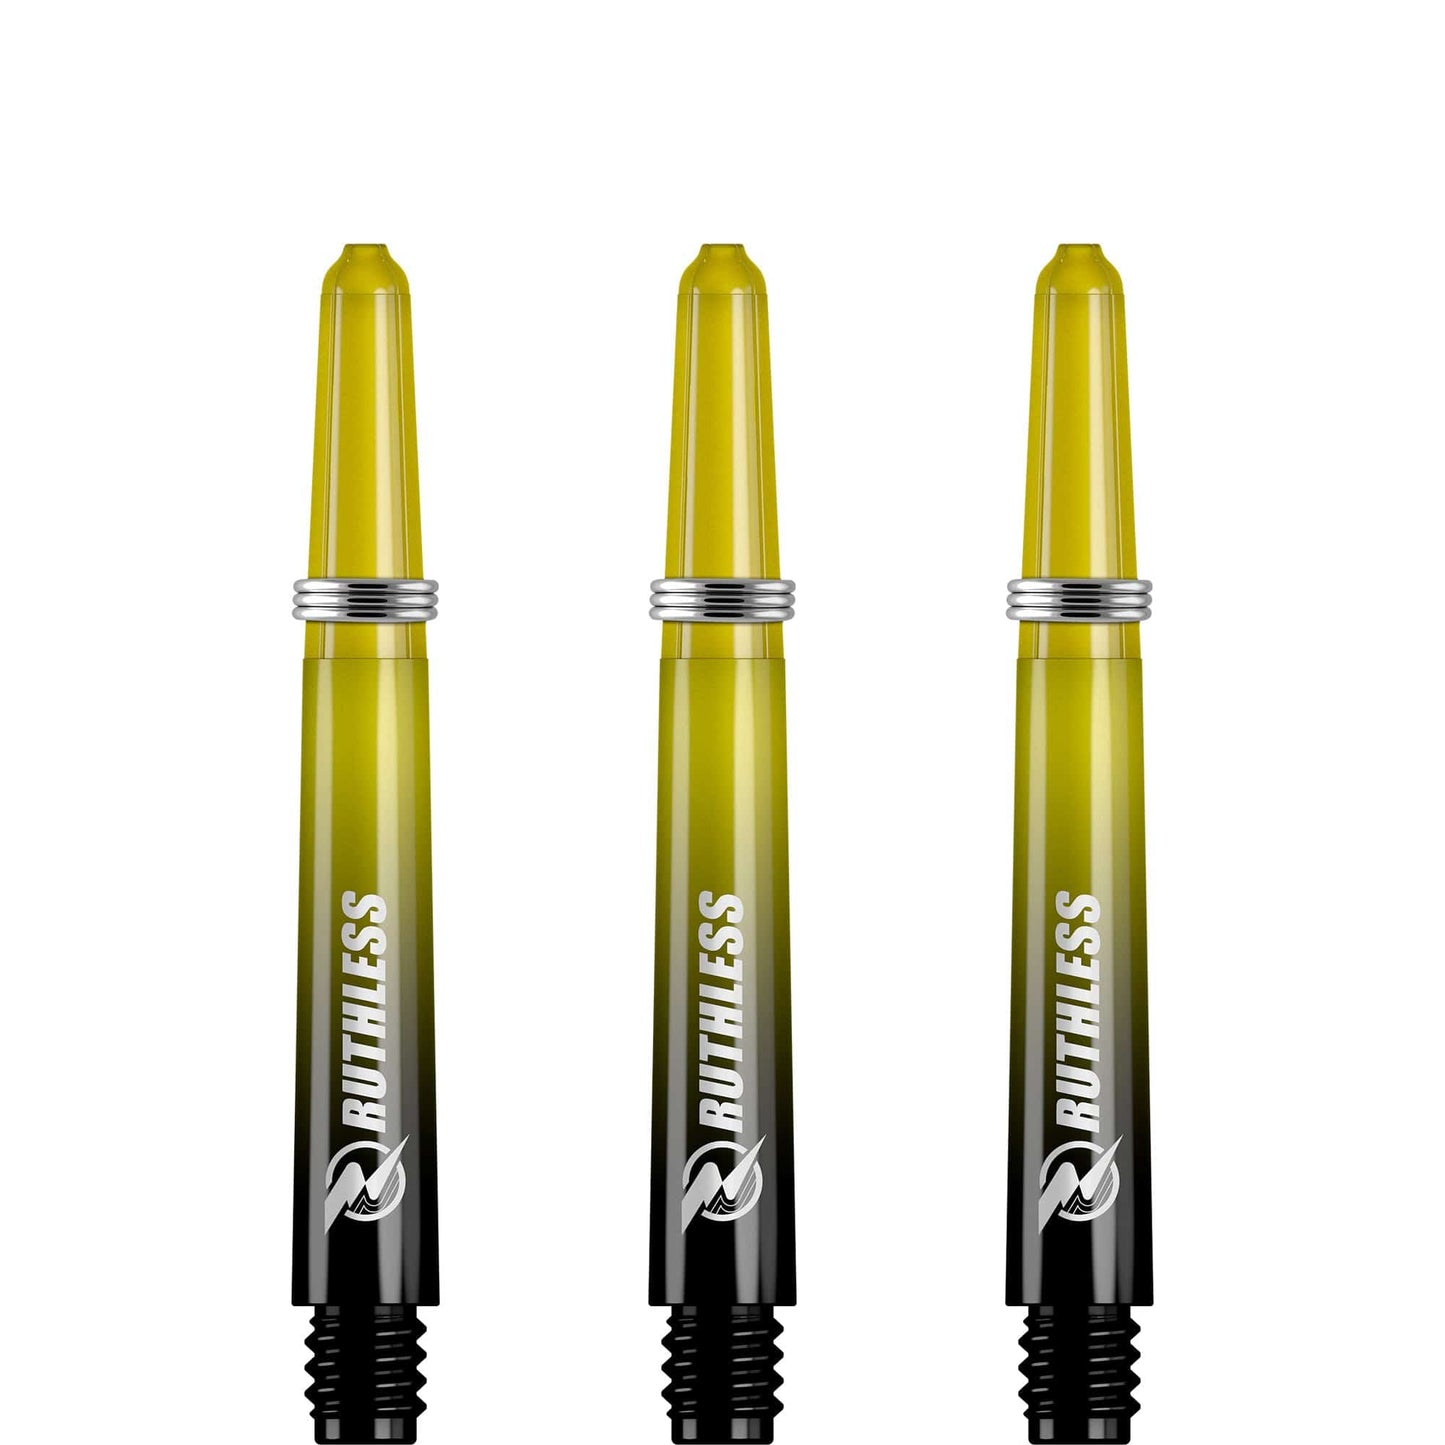 Ruthless Deflectagrip Plus Dart Shafts - Polycarbonate Stems with Springs - Yellow Tweenie